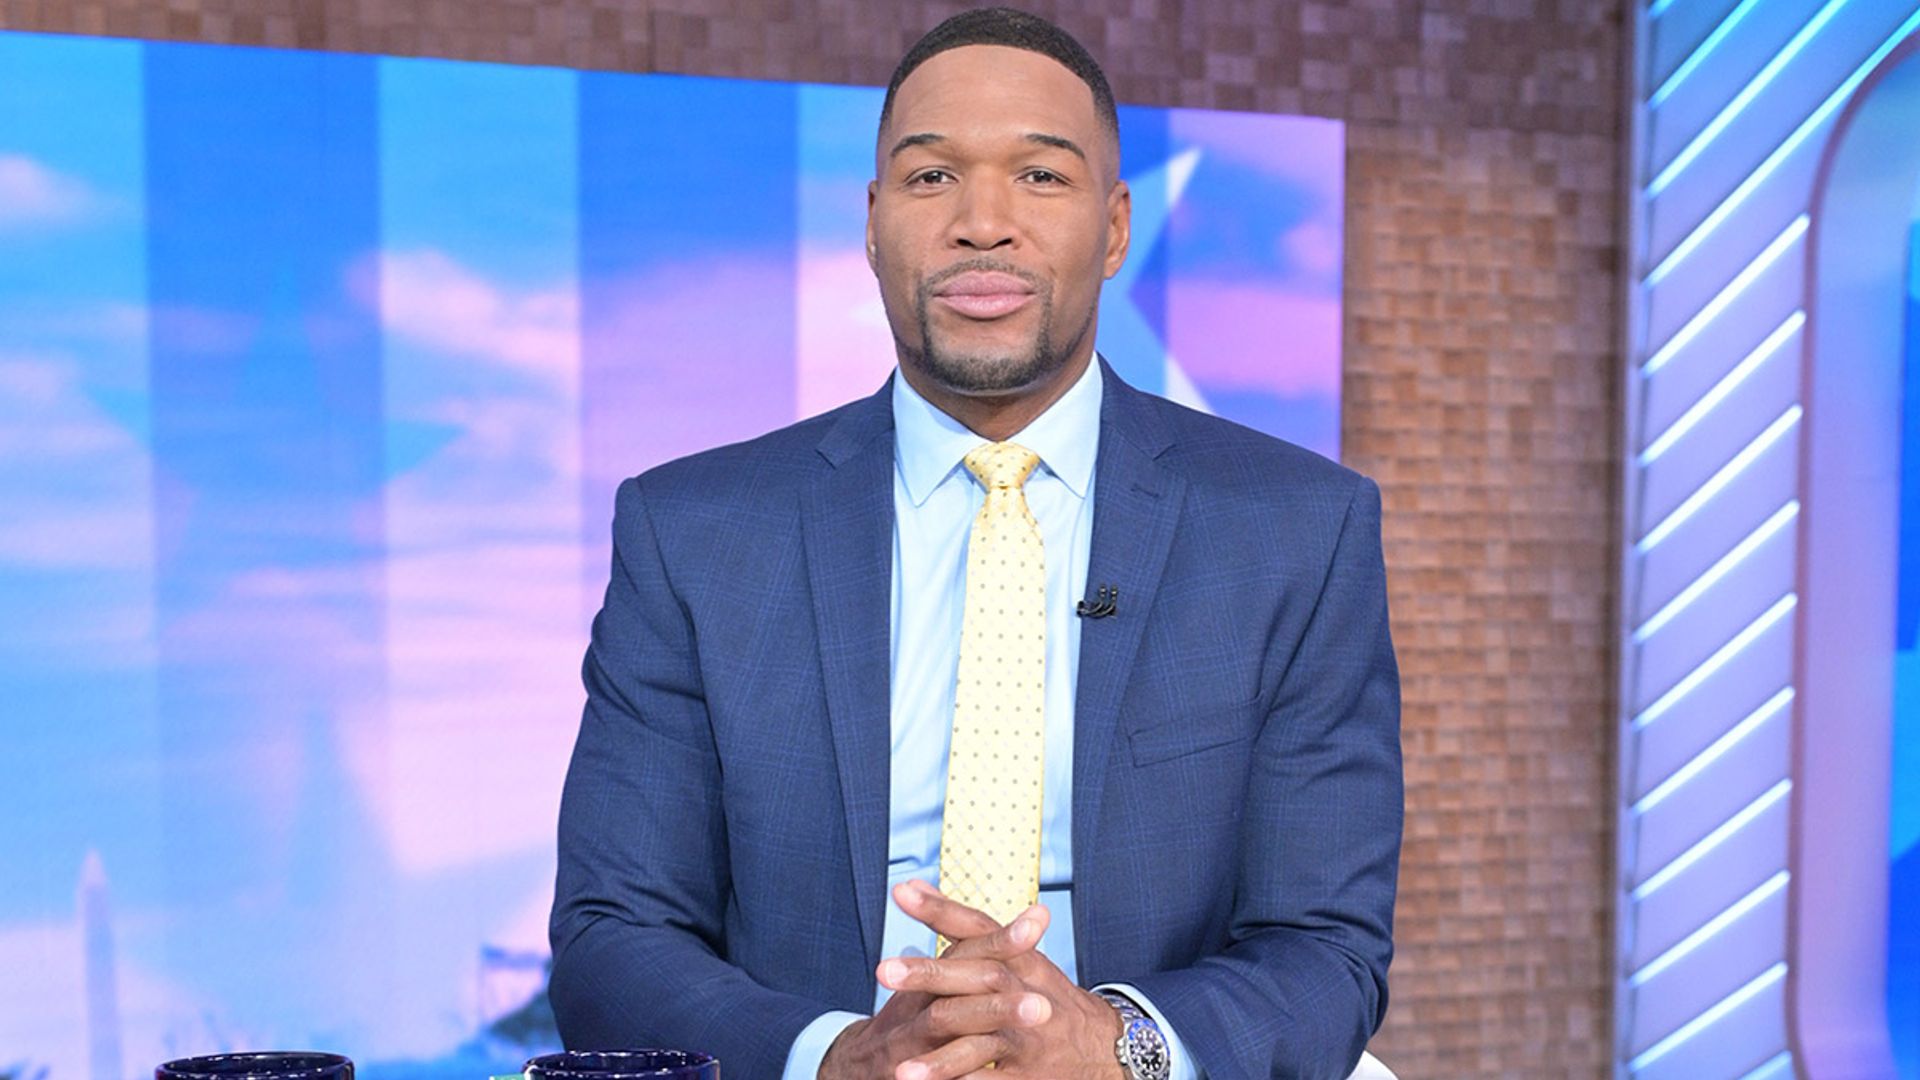 Michael Strahan has fans in stitches following fake injury video